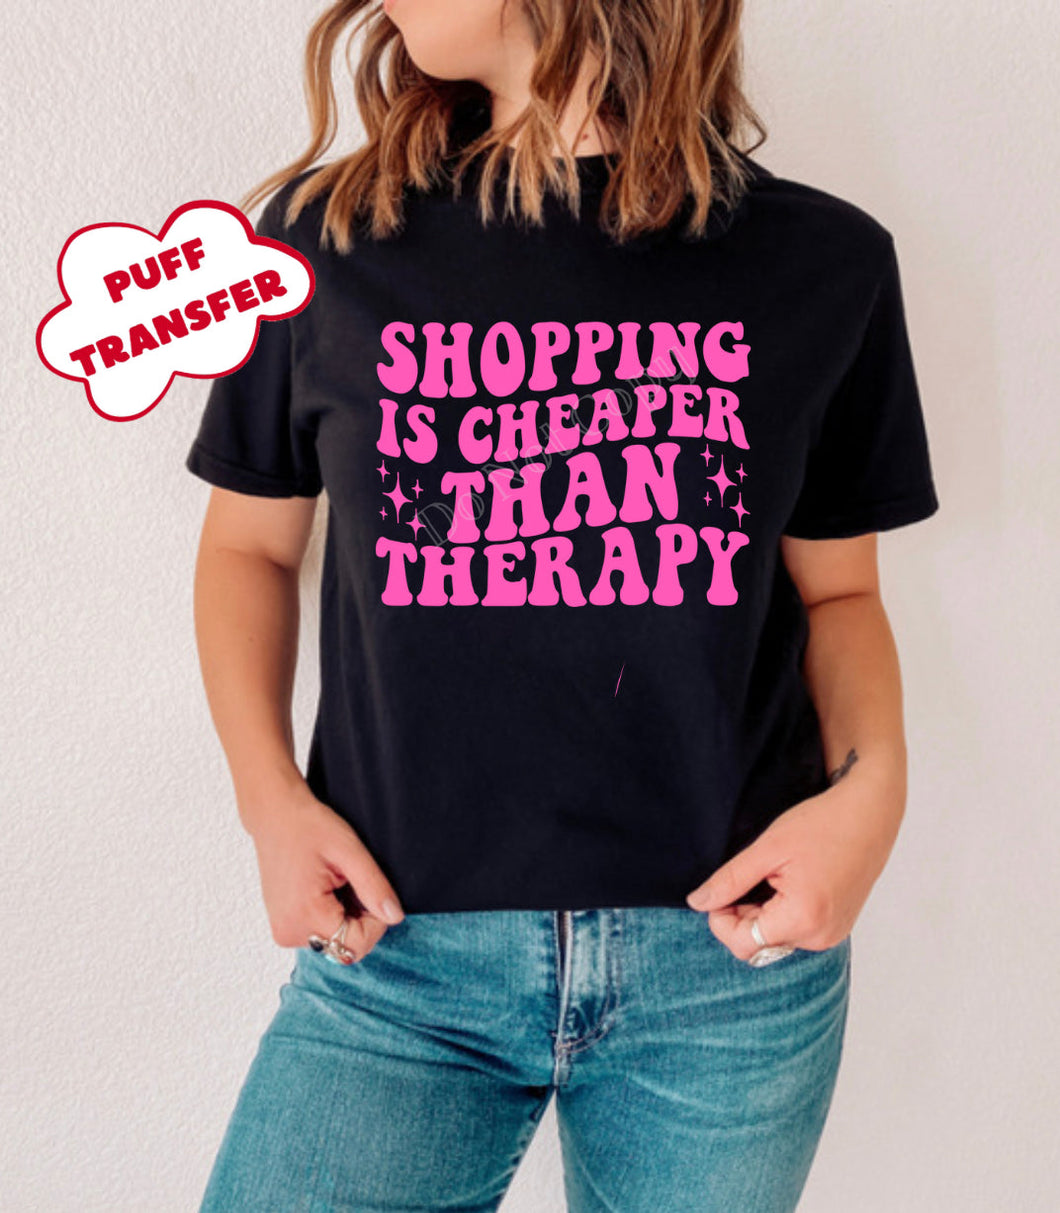 IN PRODUCTION SHIPS 11/10 Screen Print Transfer | Shopping is Cheaper Than Therapy PUFF